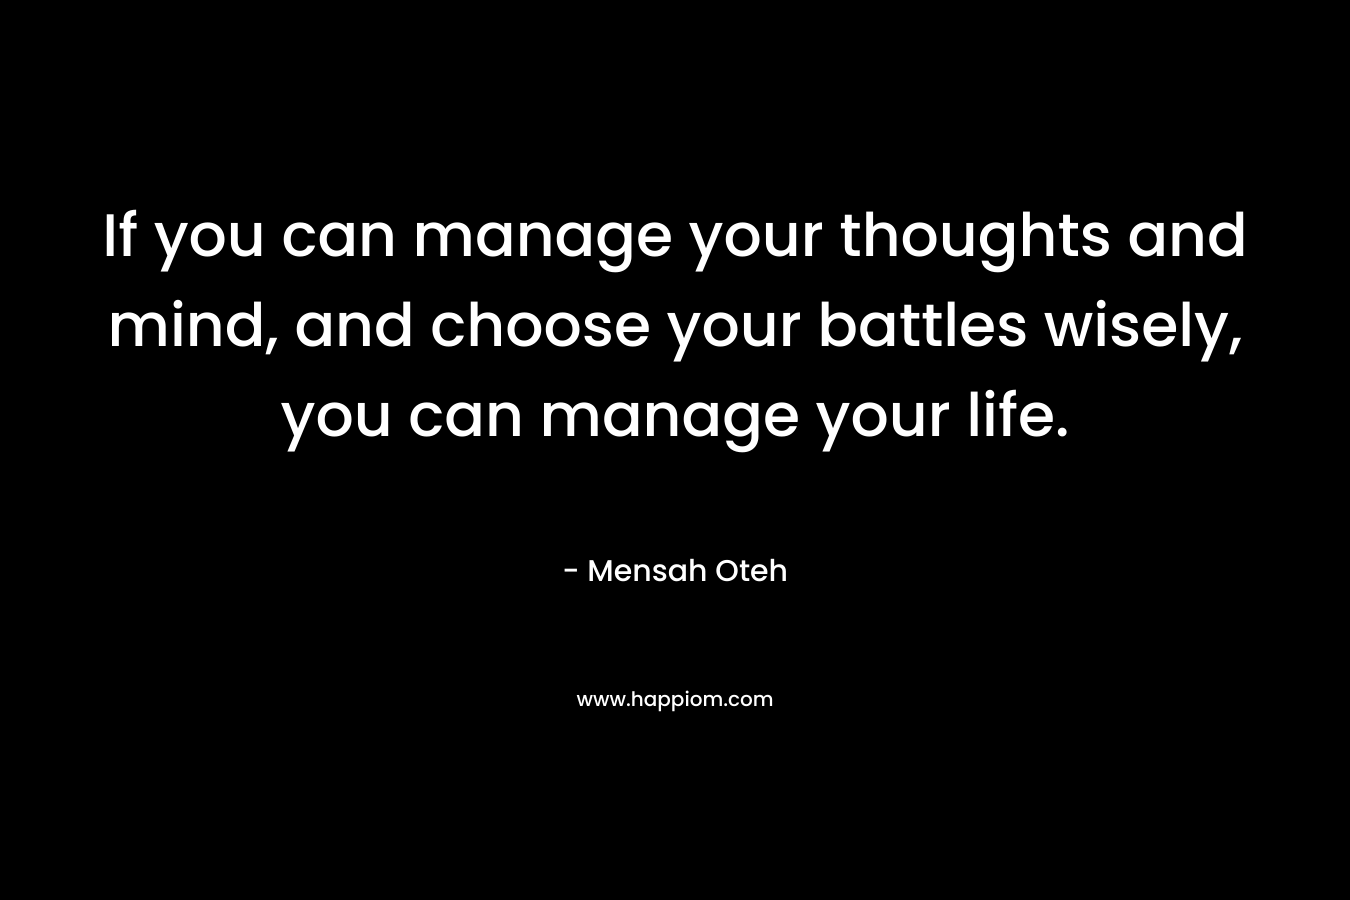 If you can manage your thoughts and mind, and choose your battles wisely, you can manage your life.